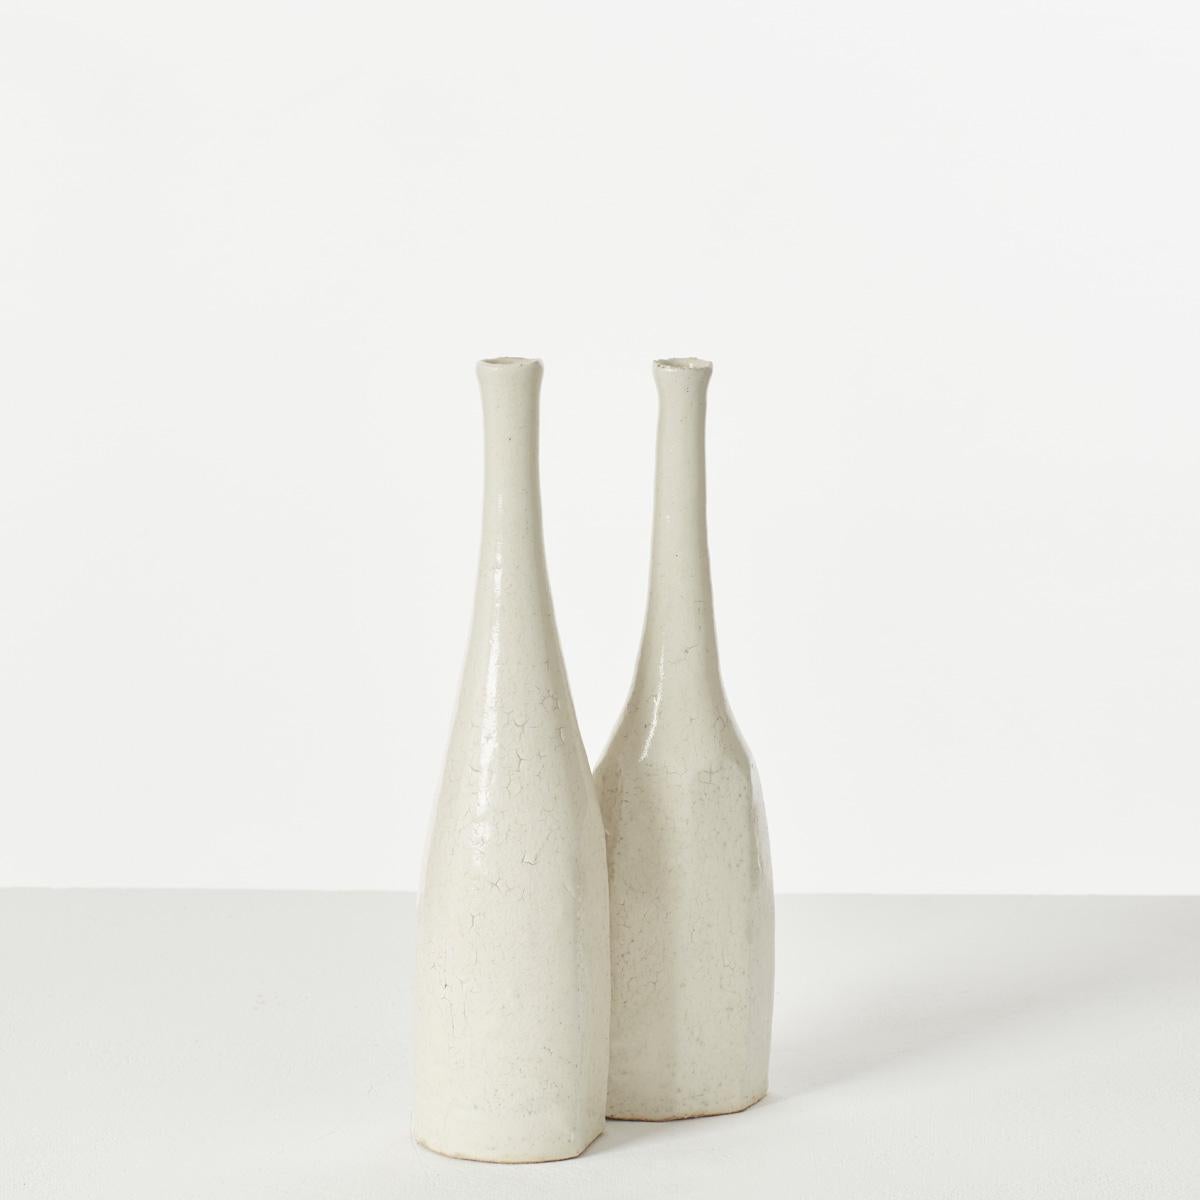 A pair of beautifully formed bottle vases, by Japanese ceramicist Akiko Hirai (1970-). Hirai produces domestic ceramicware for everyday use. Basing her designs on the Japanese aesthetic of relativity, she embraces the beauty of irregularity,